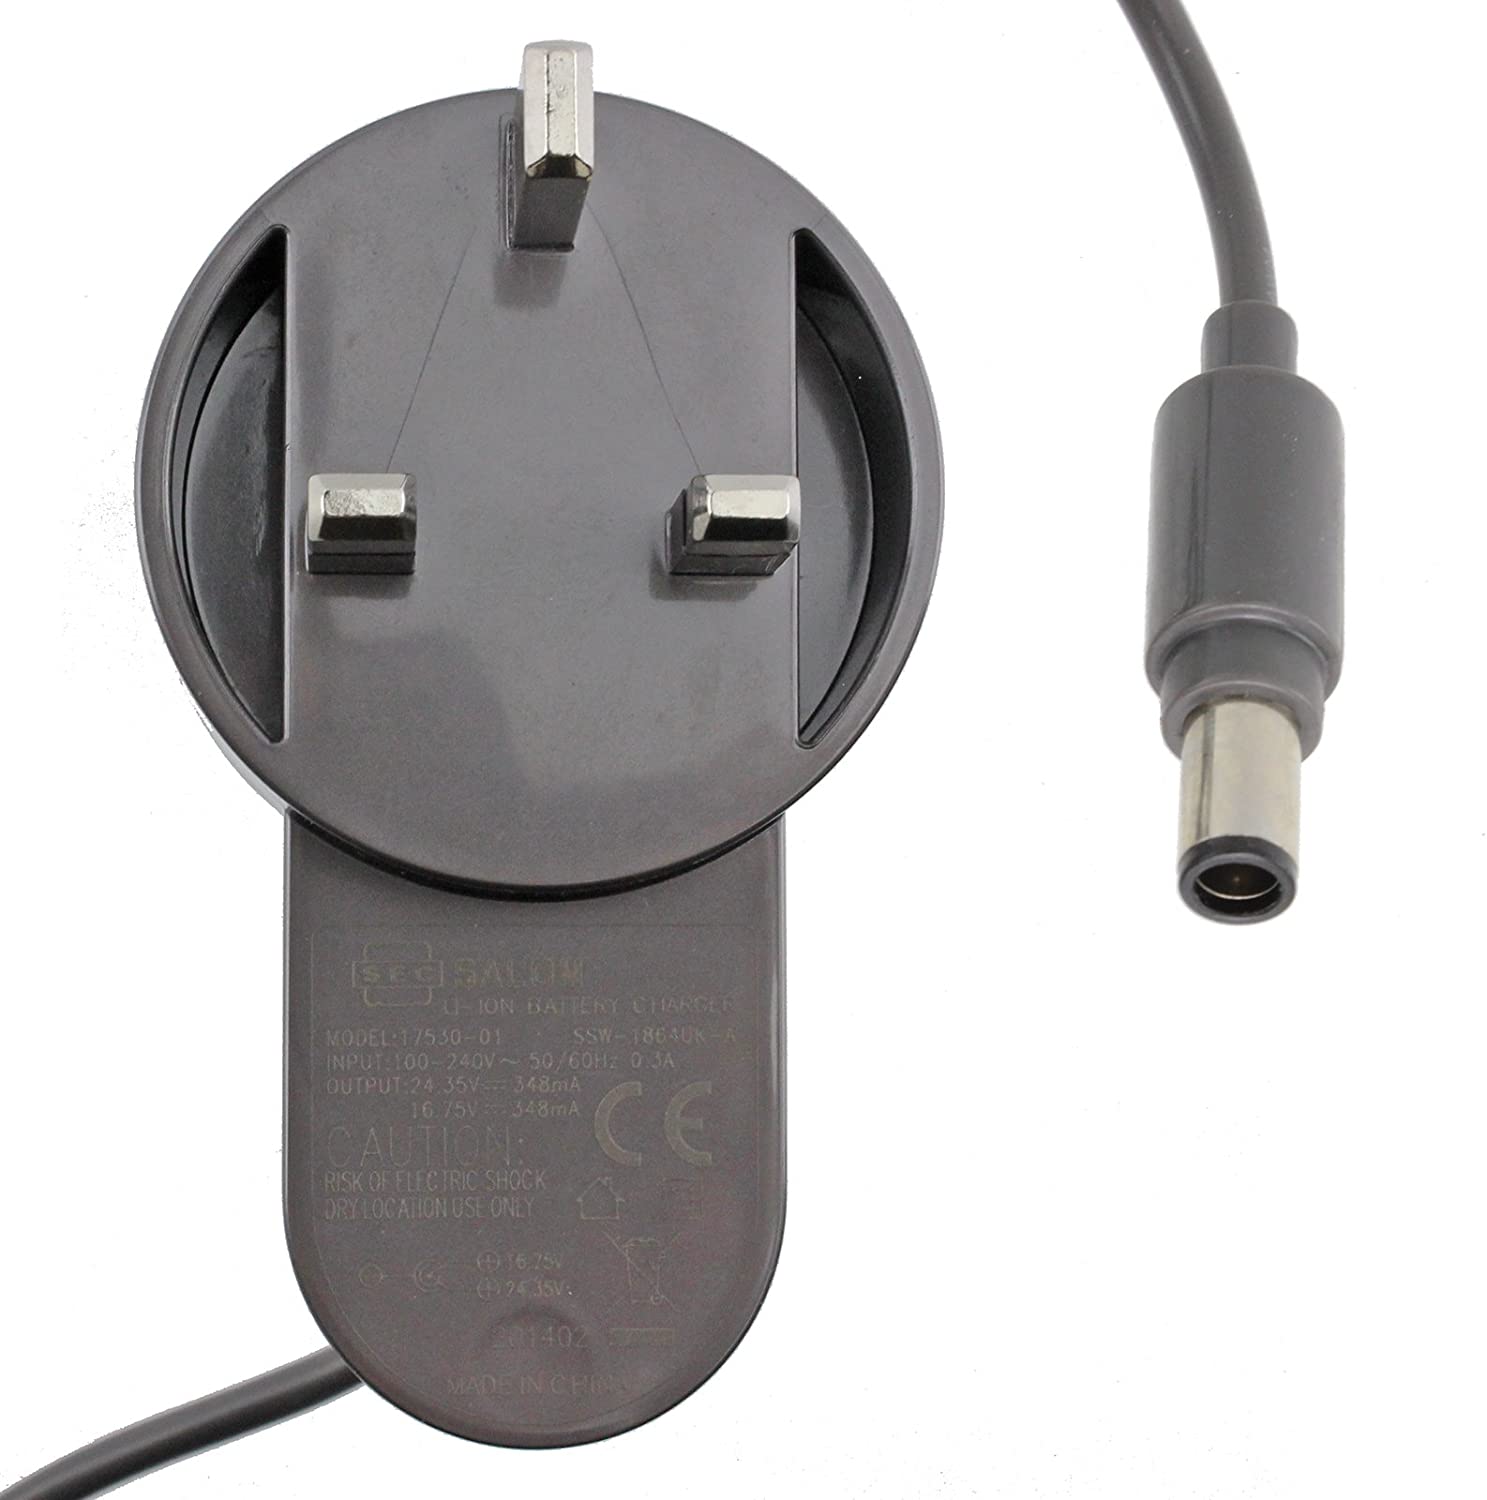 Battery Charger Plug Cable for Dyson DC44 Animal Vacuum Cleaner